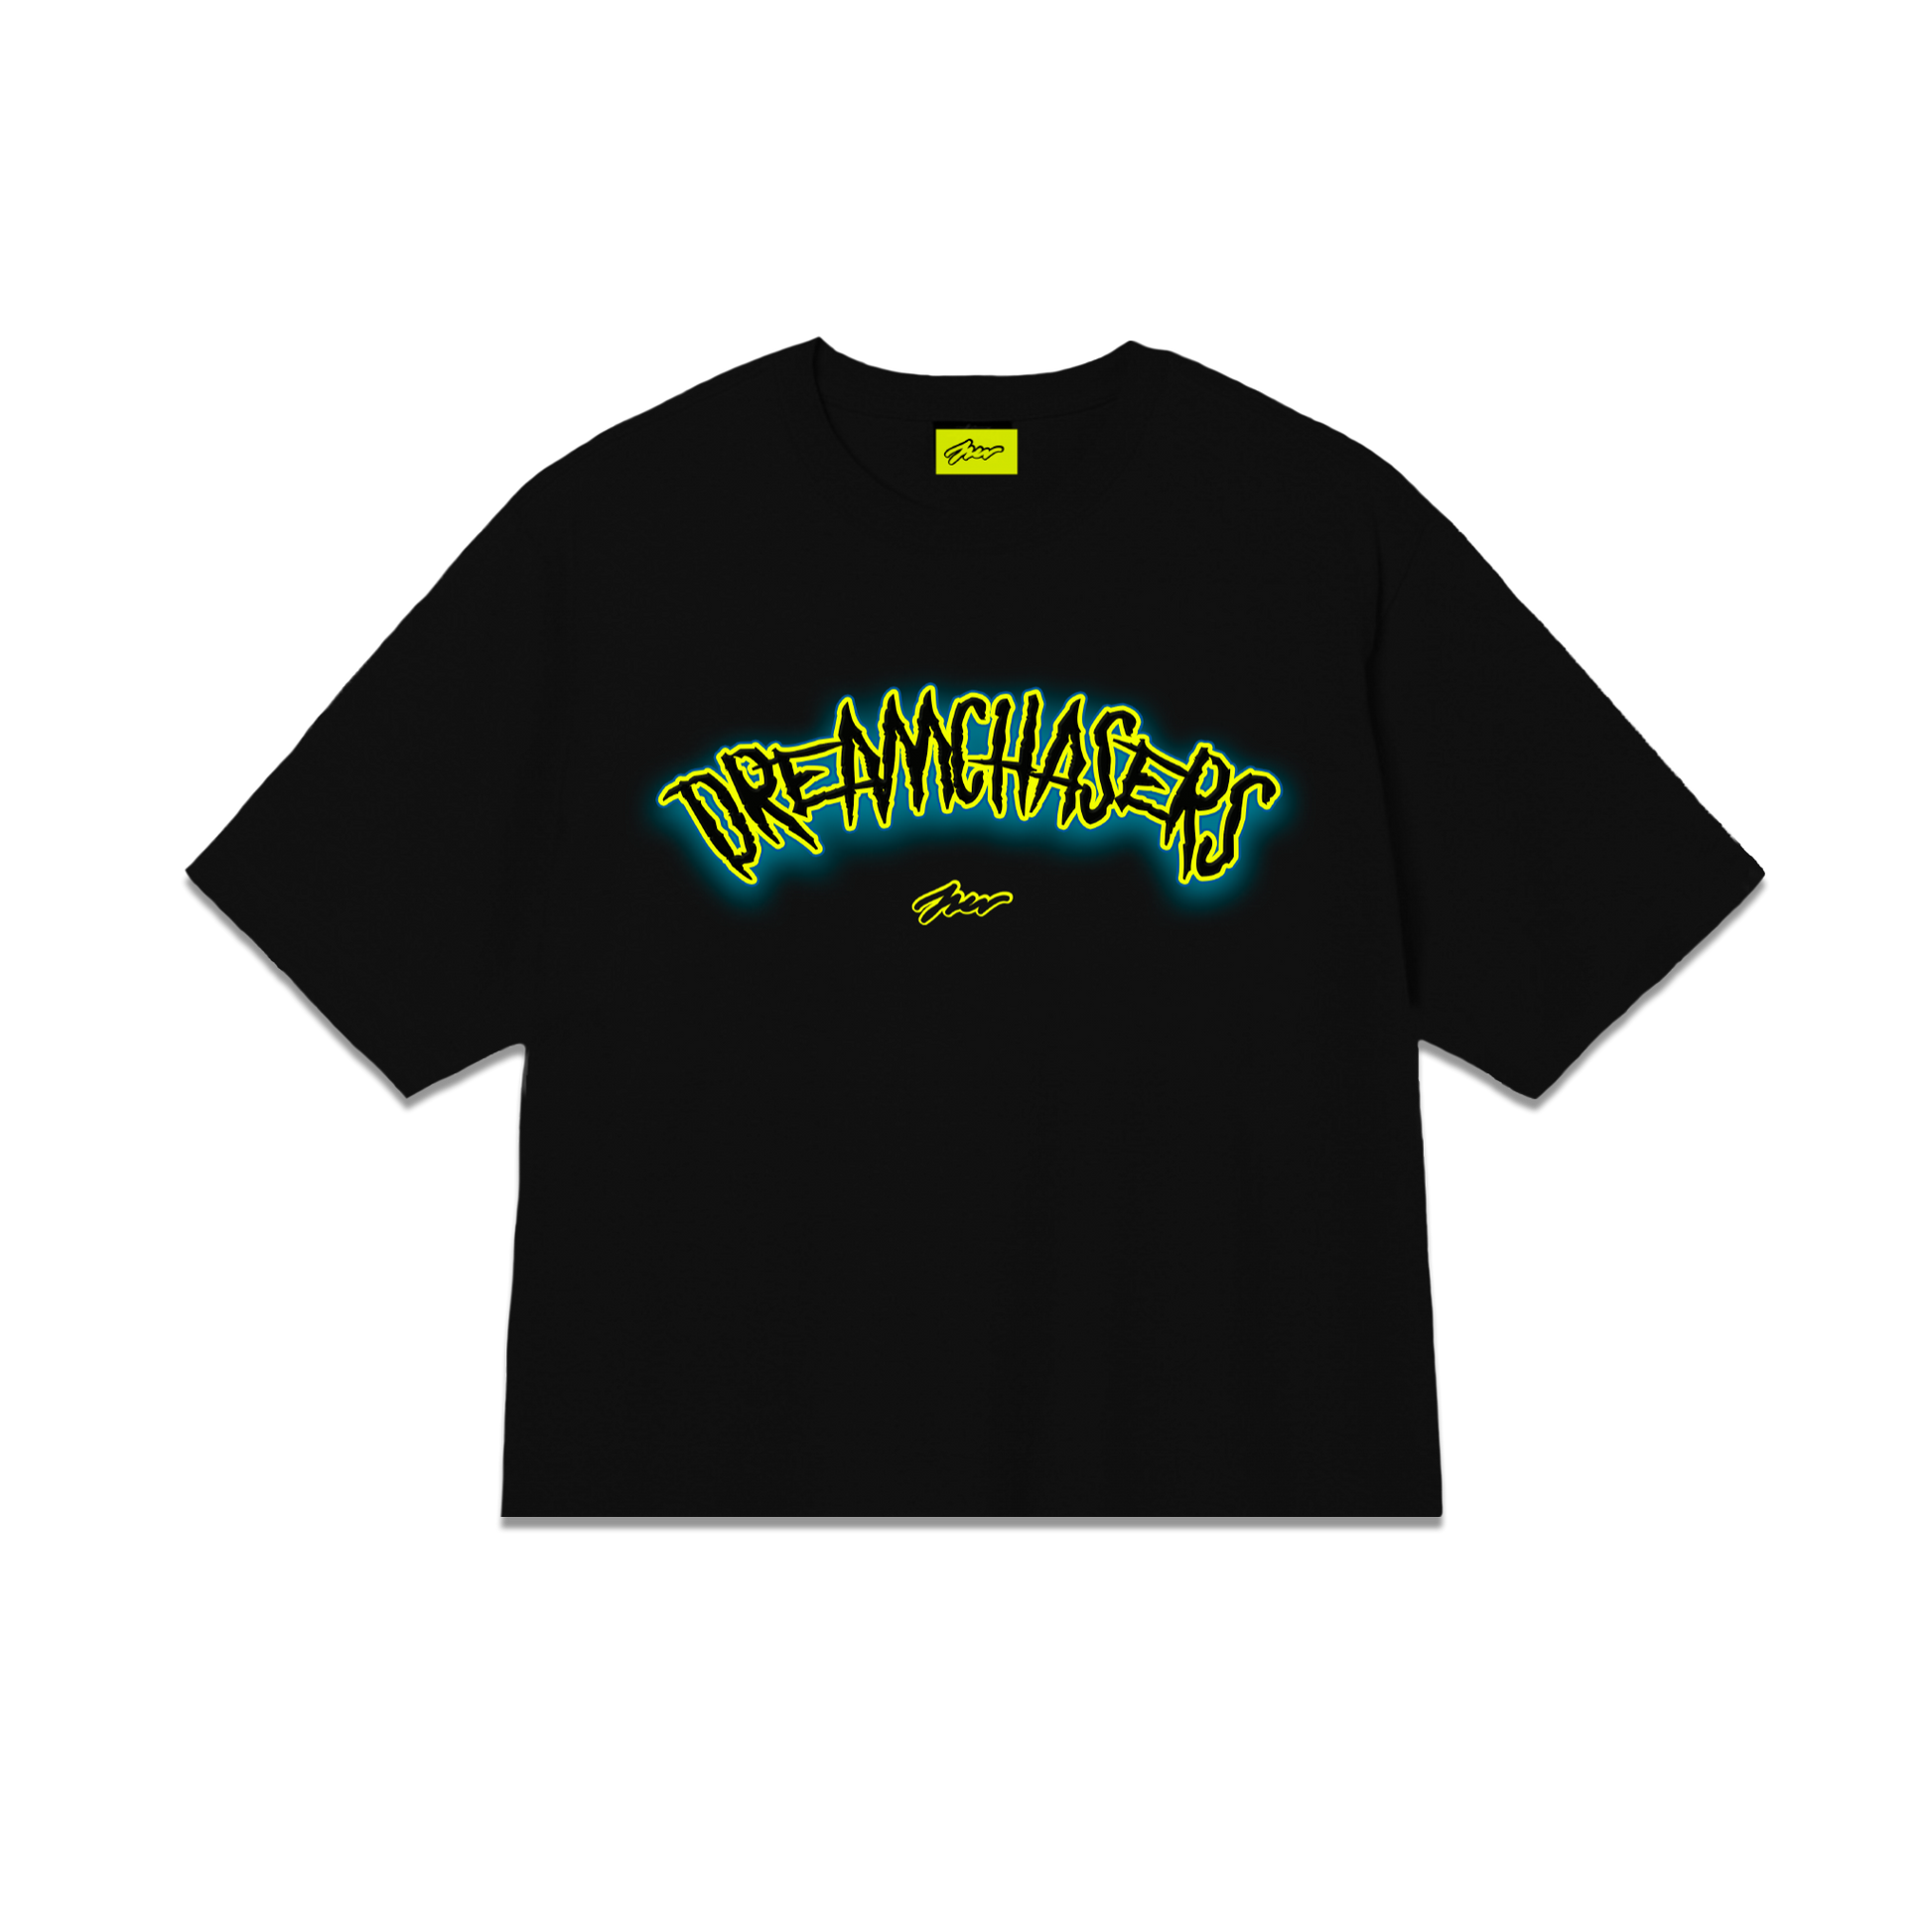 DREAMCHASERS Black Tee